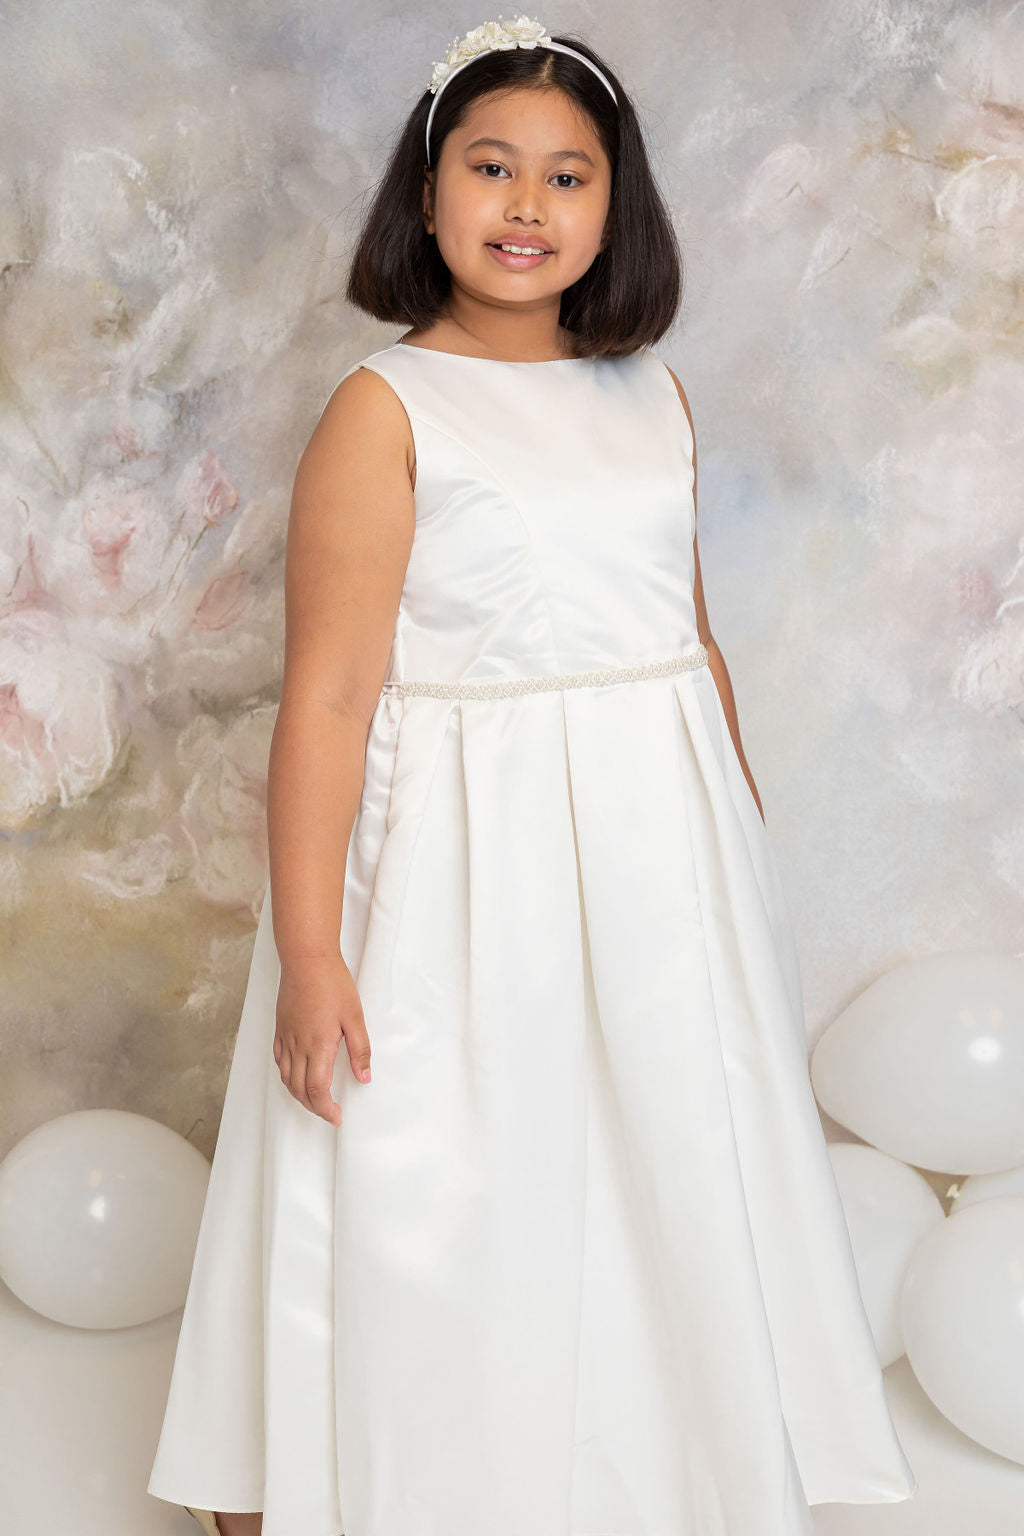 Classic Girls Dresses - Carriage Boutique